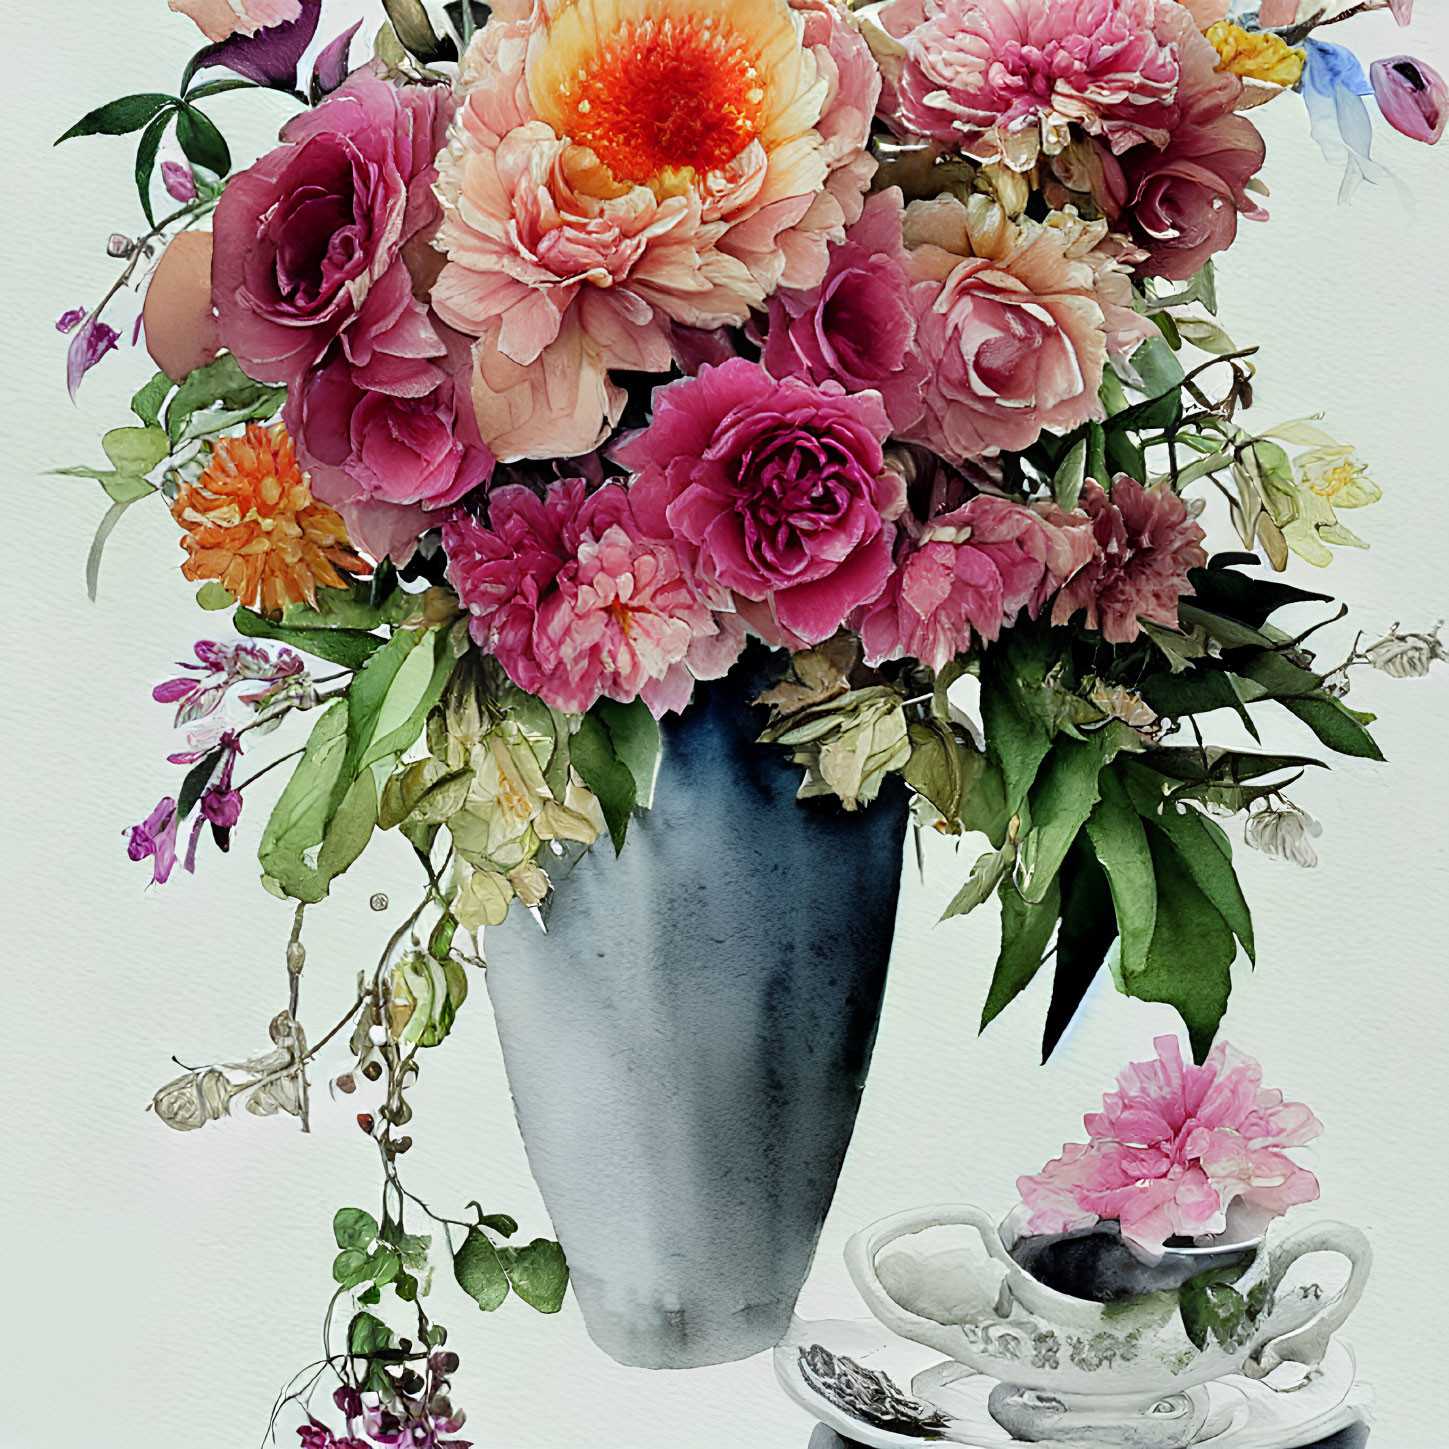 Colorful watercolor painting of flowers in blue vase with teacup